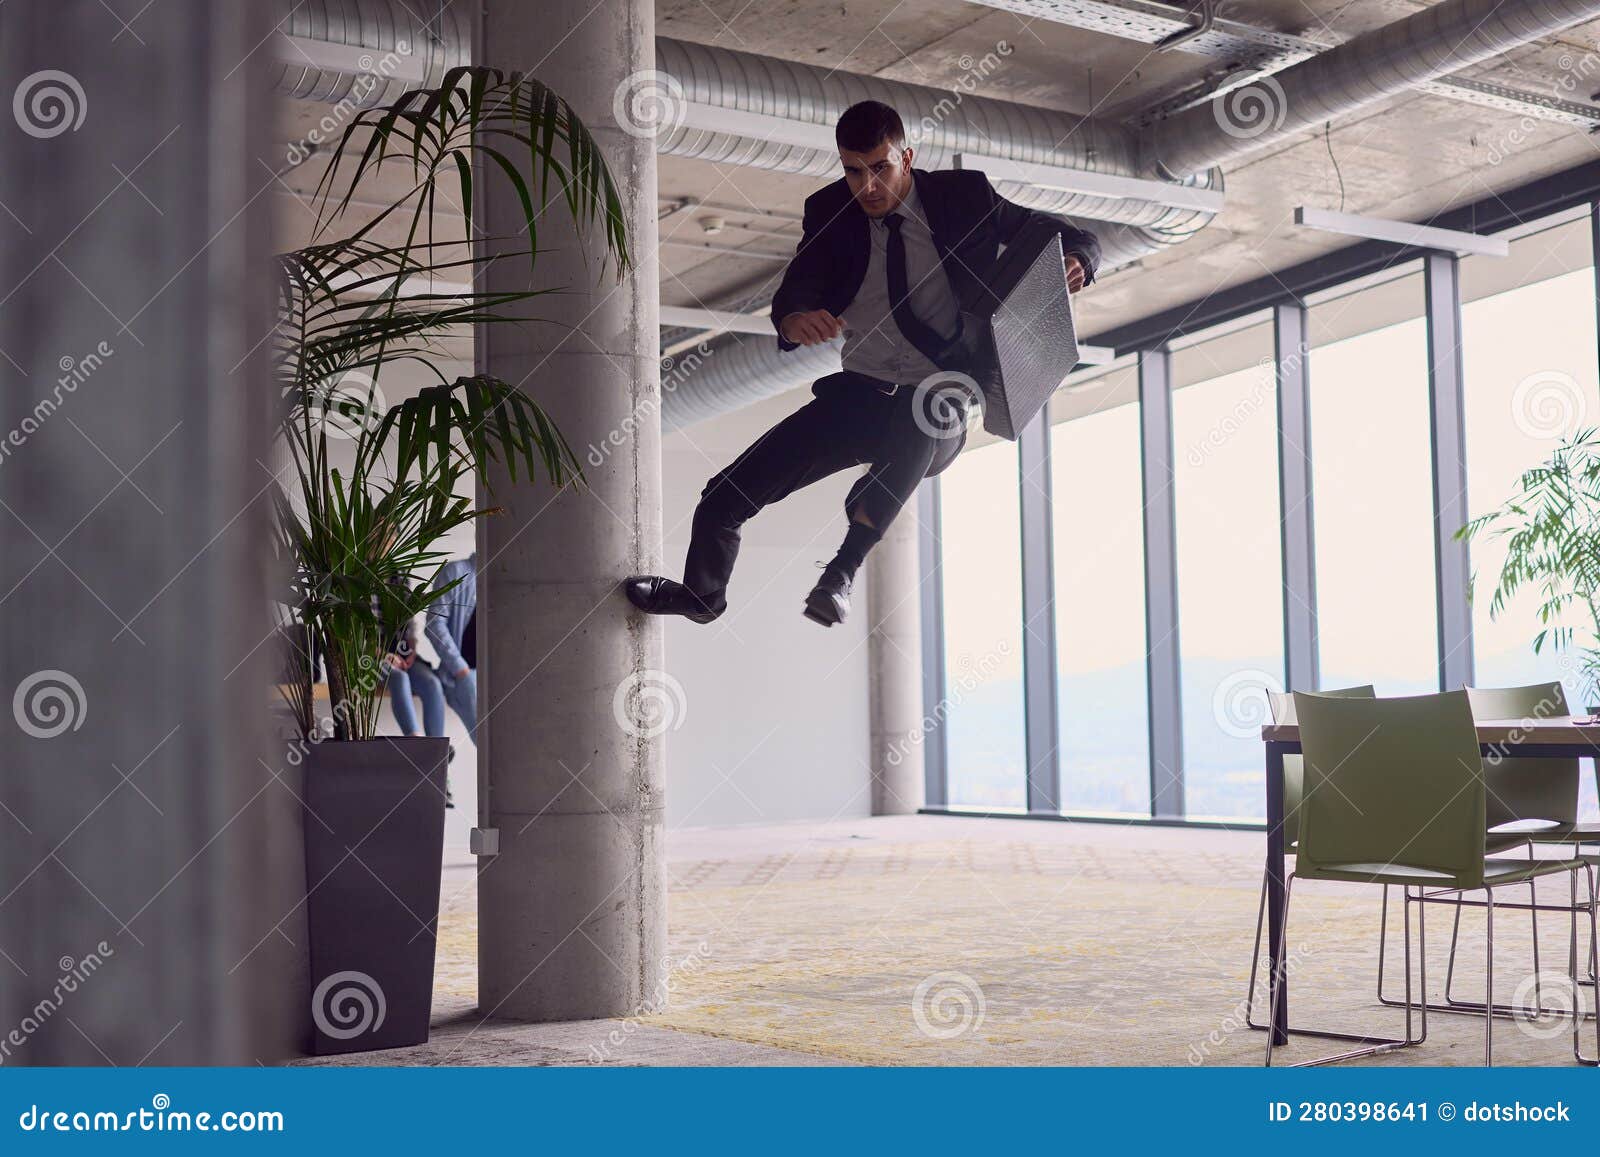 in the modern office, a businessman with a briefcase captivates everyone as he performs thrilling aerial acrobatics